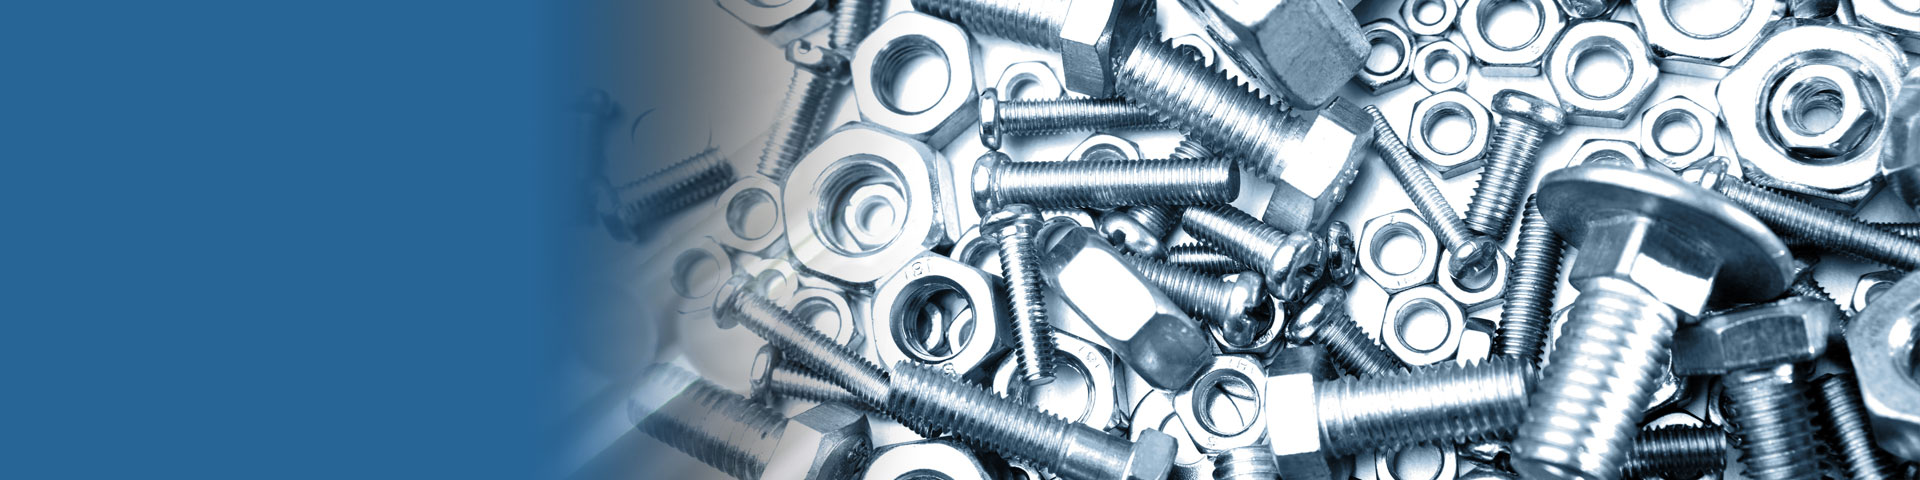 317 Stainless Steel Fasteners